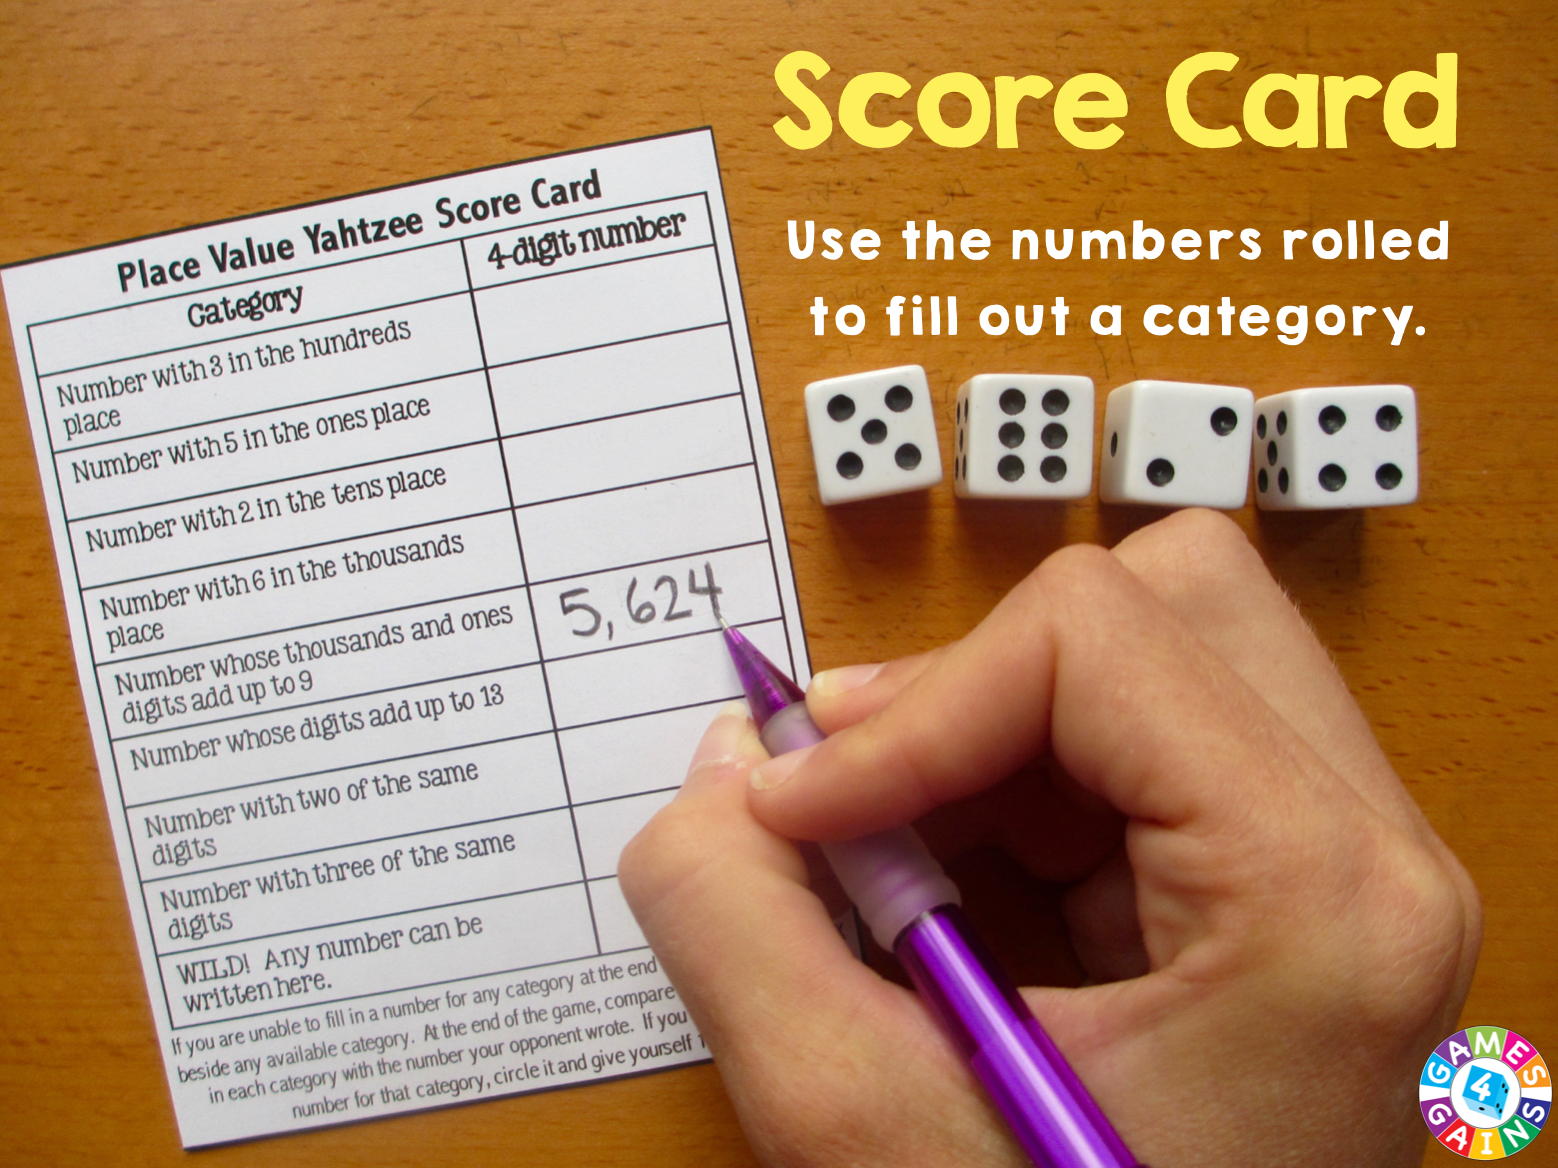 Score Some Points with Place Value Yahtzee! – Games 4 Gains